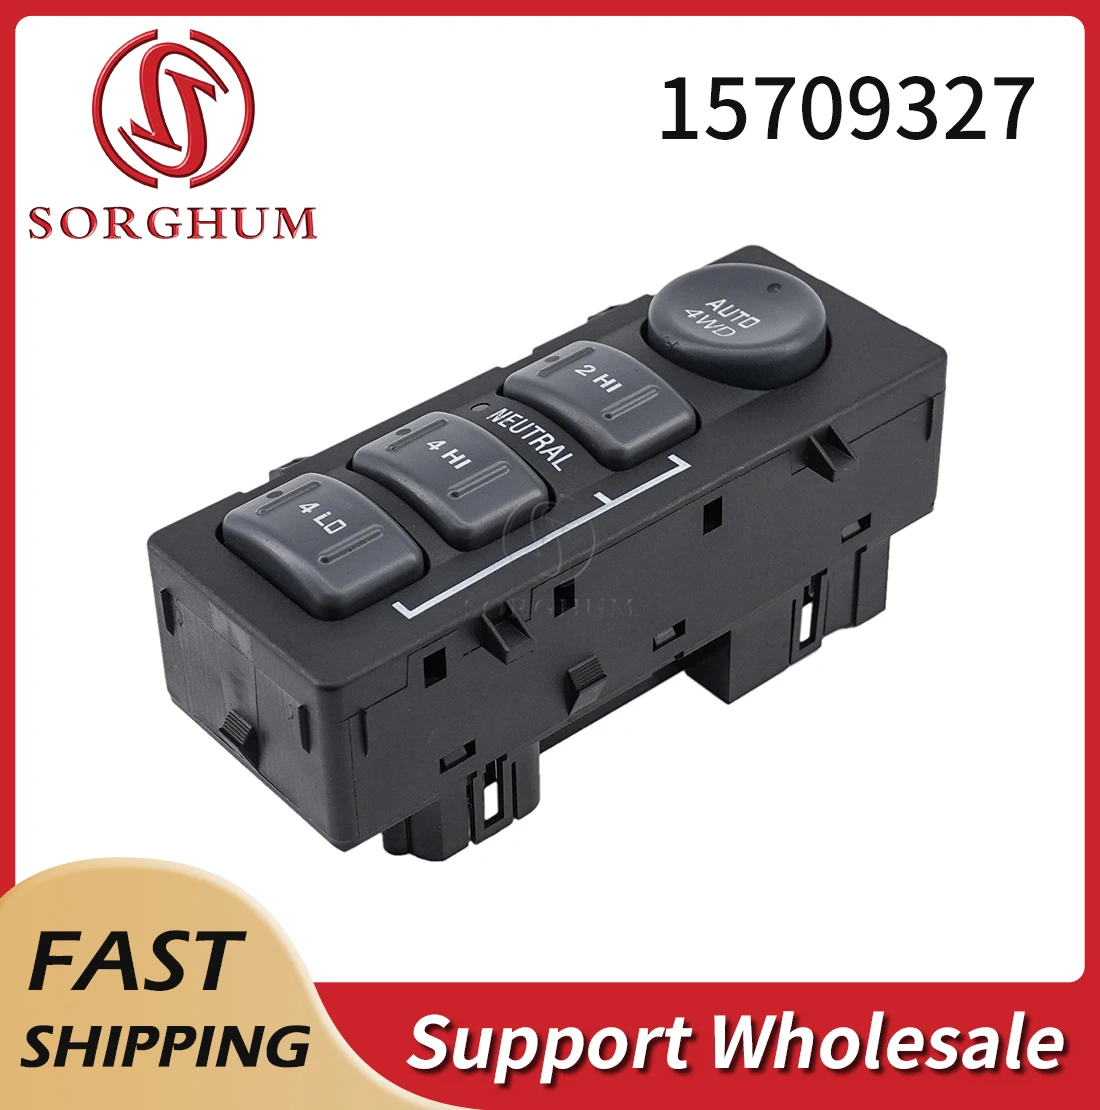 

Sorghum 15709327 4WD Wheel Drive Switch Button For GMC Sierra Yukon For Cadillac EXT For Chevrolet Silverado Avalanche 19168767